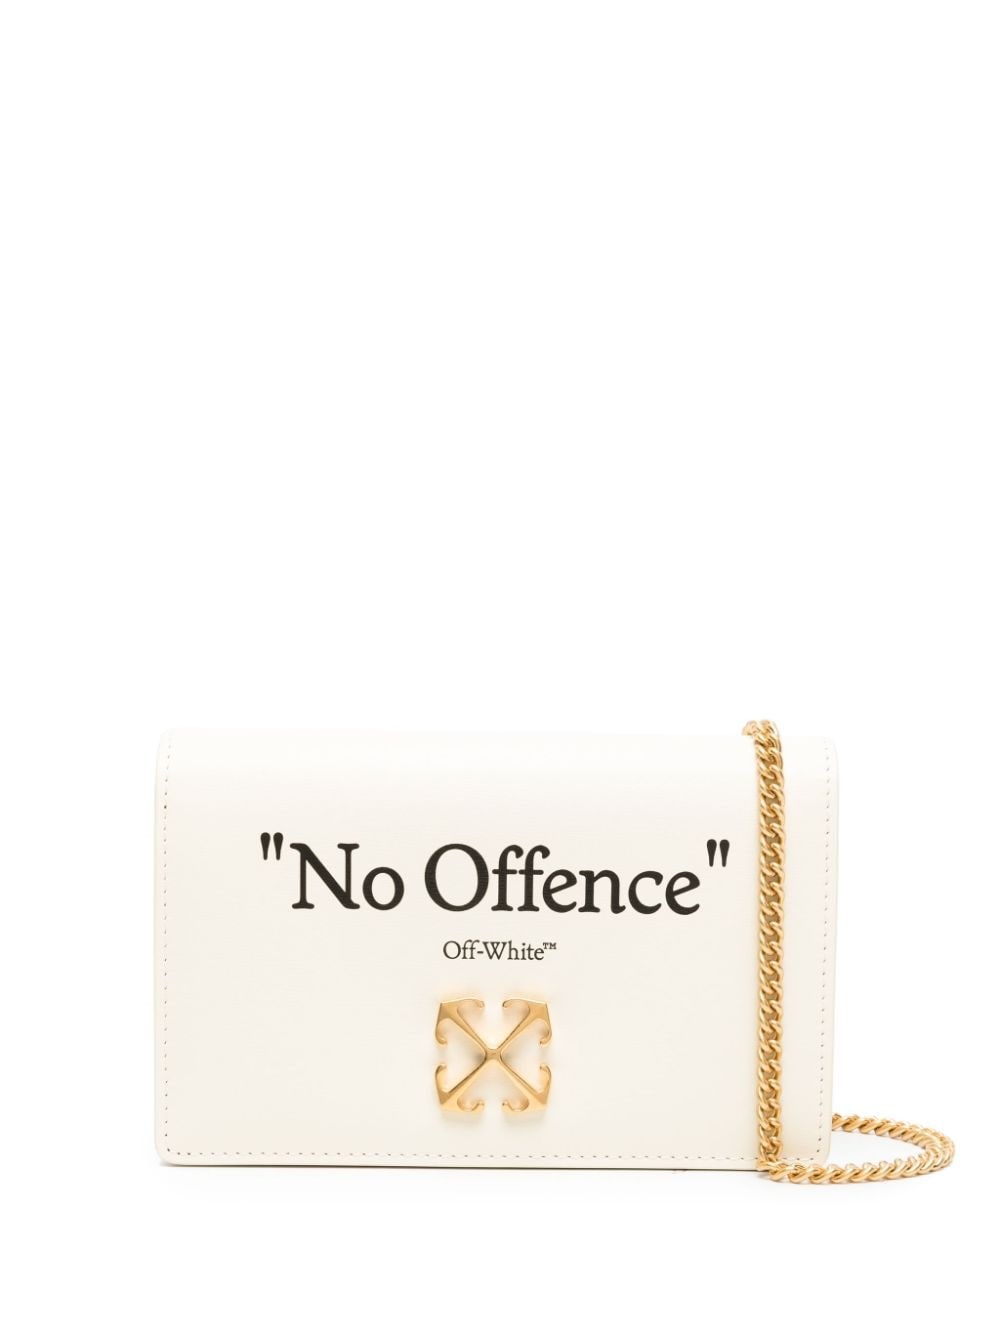 Off-white Jitney 0.5 Leather Crossbody Bag In Neutrals